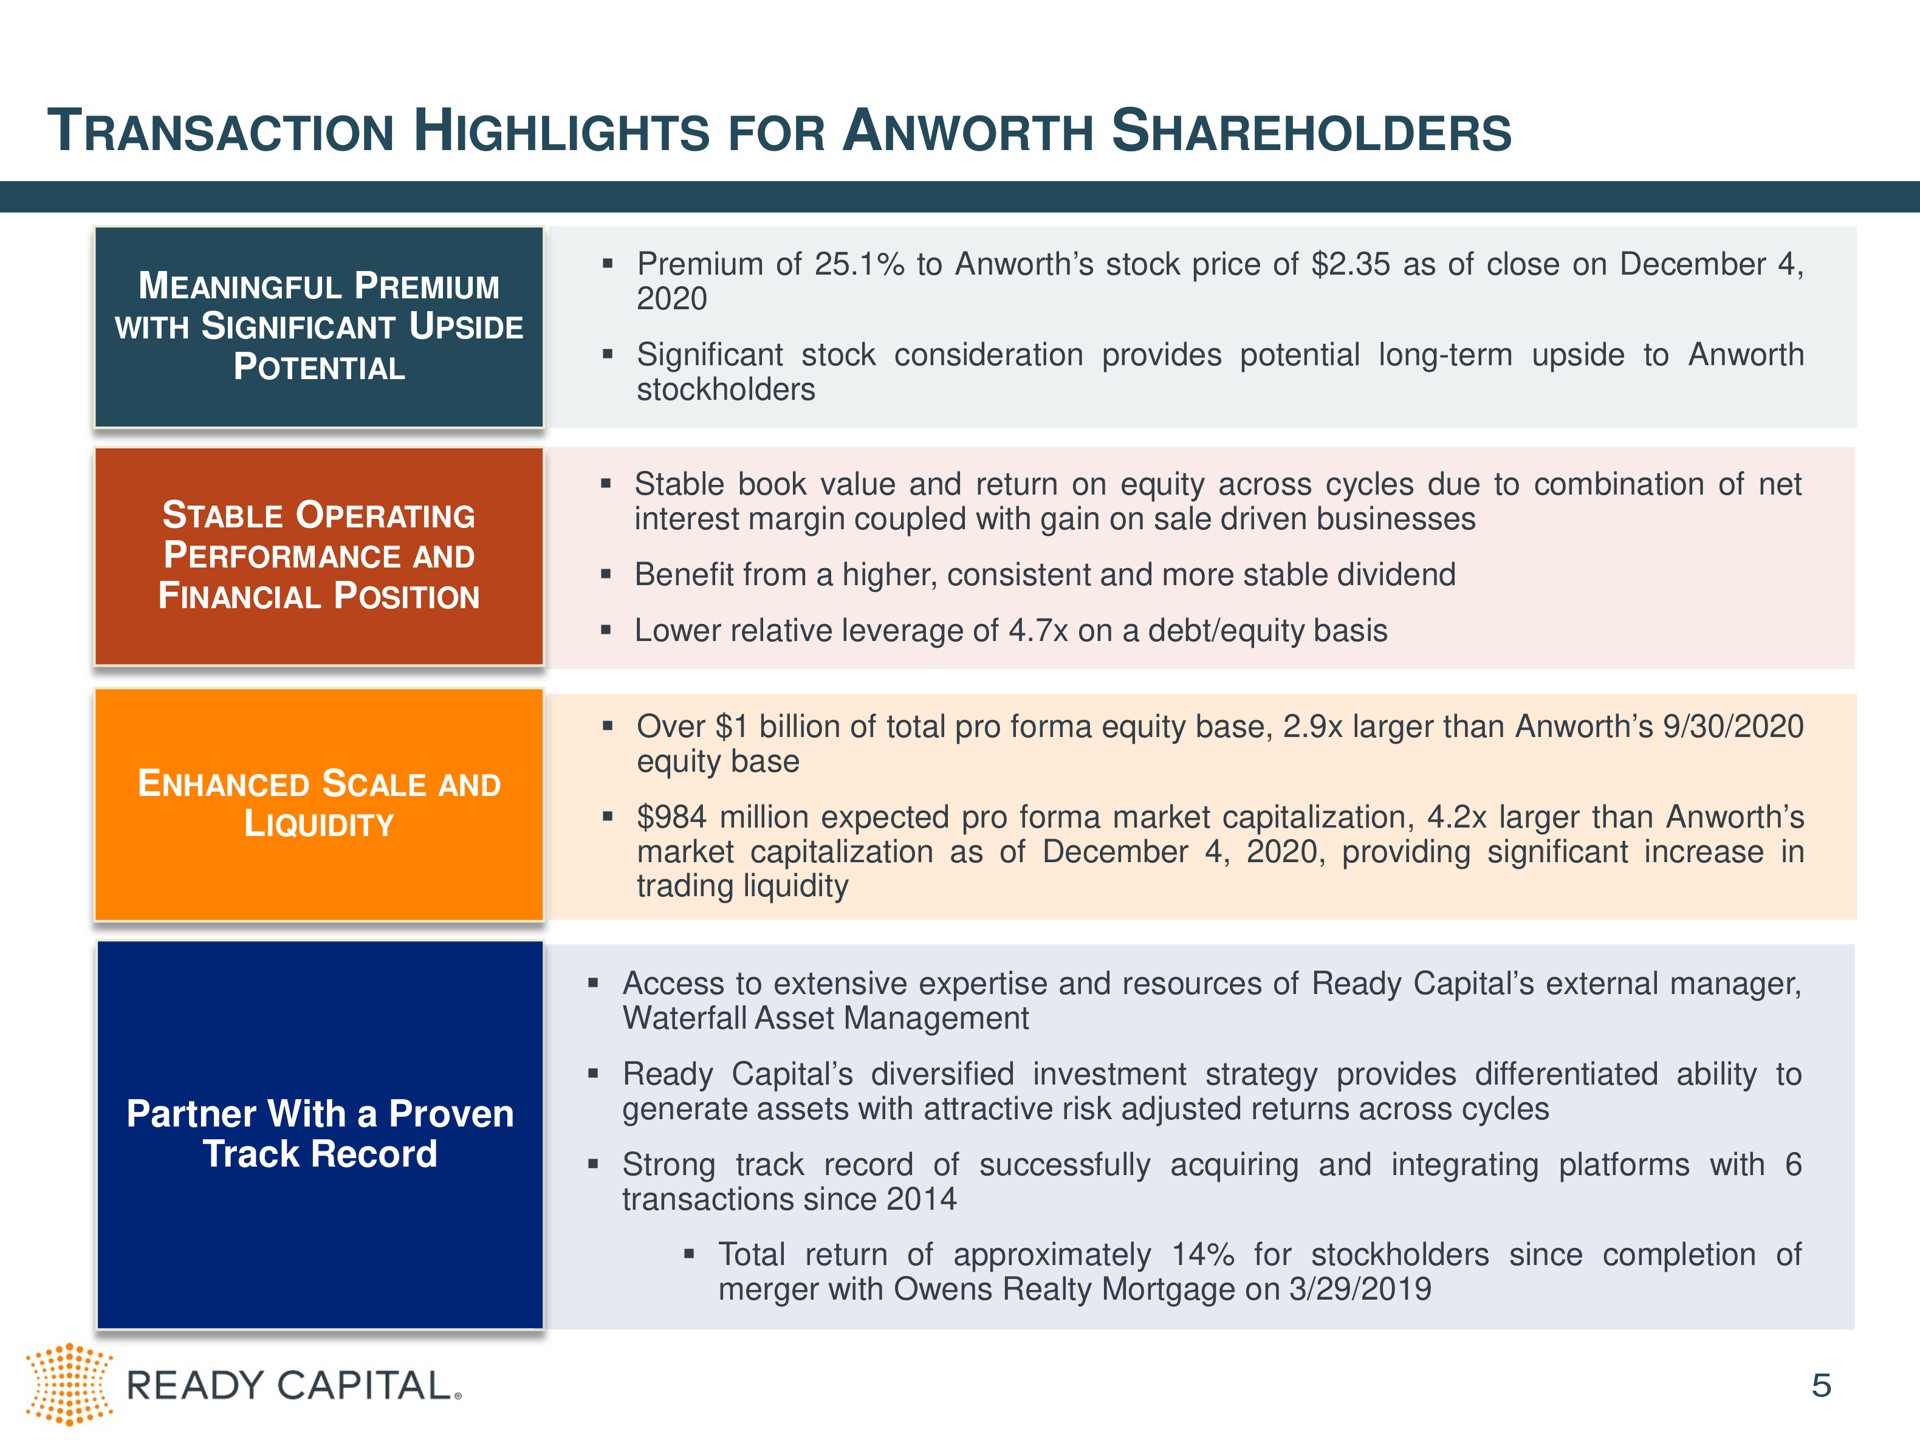 transaction highlights for shareholders partner with a proven track record meaningful premium strong of successfully acquiring and integrating platforms ready capital | Ready Capital